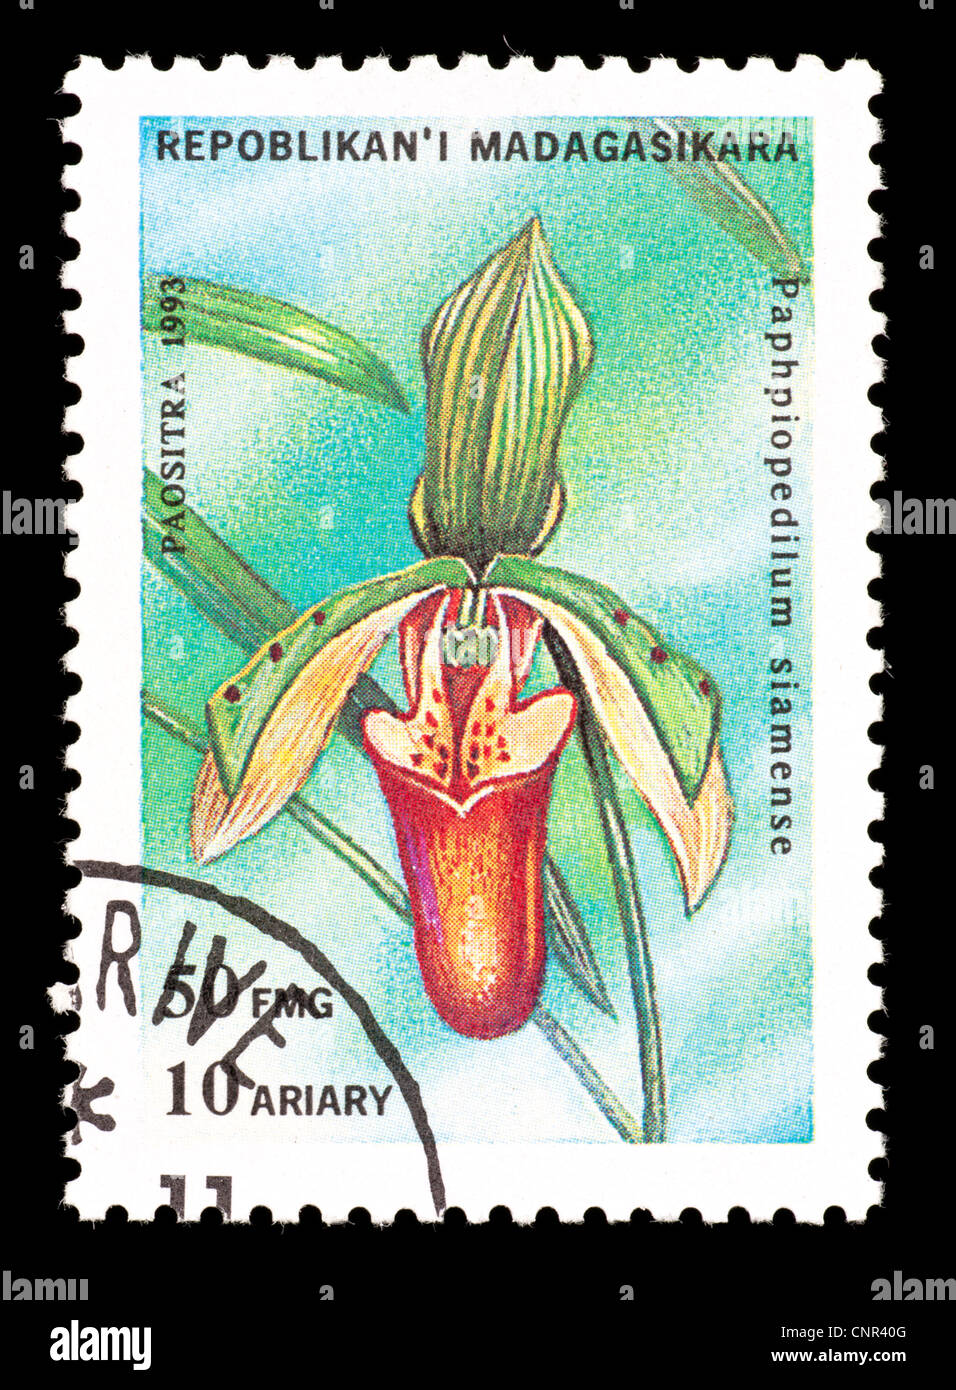 Postage stamp from Madagascar depicting an exotic orchid (Paphiopedilum  x siamense) Stock Photo